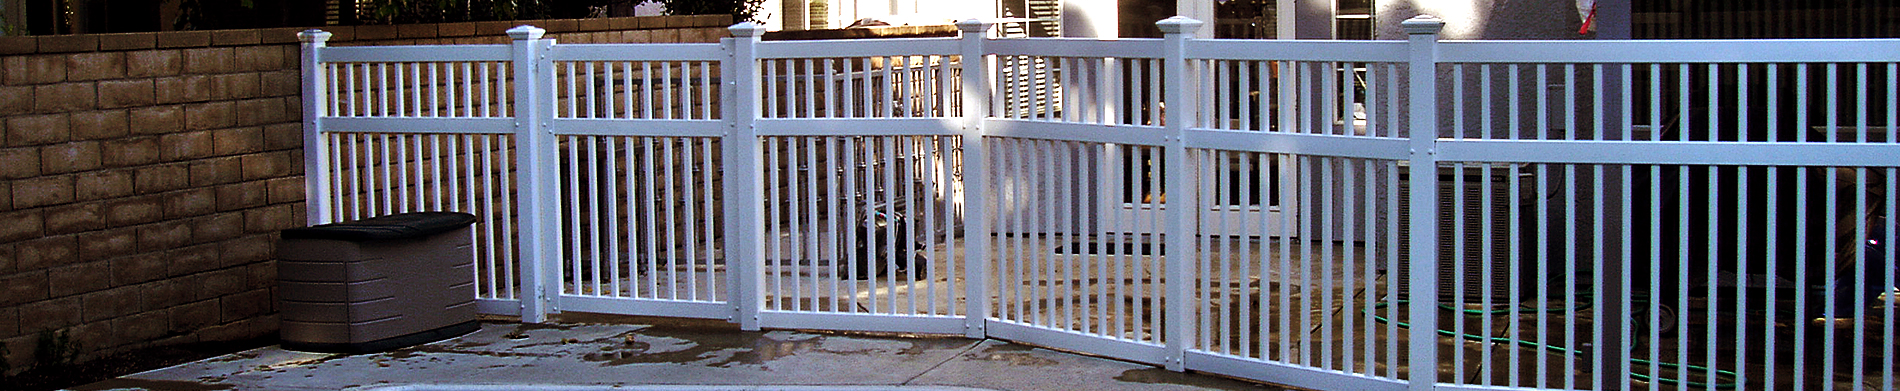 Give Your Pool a New Look This Summer With Duramax Fences